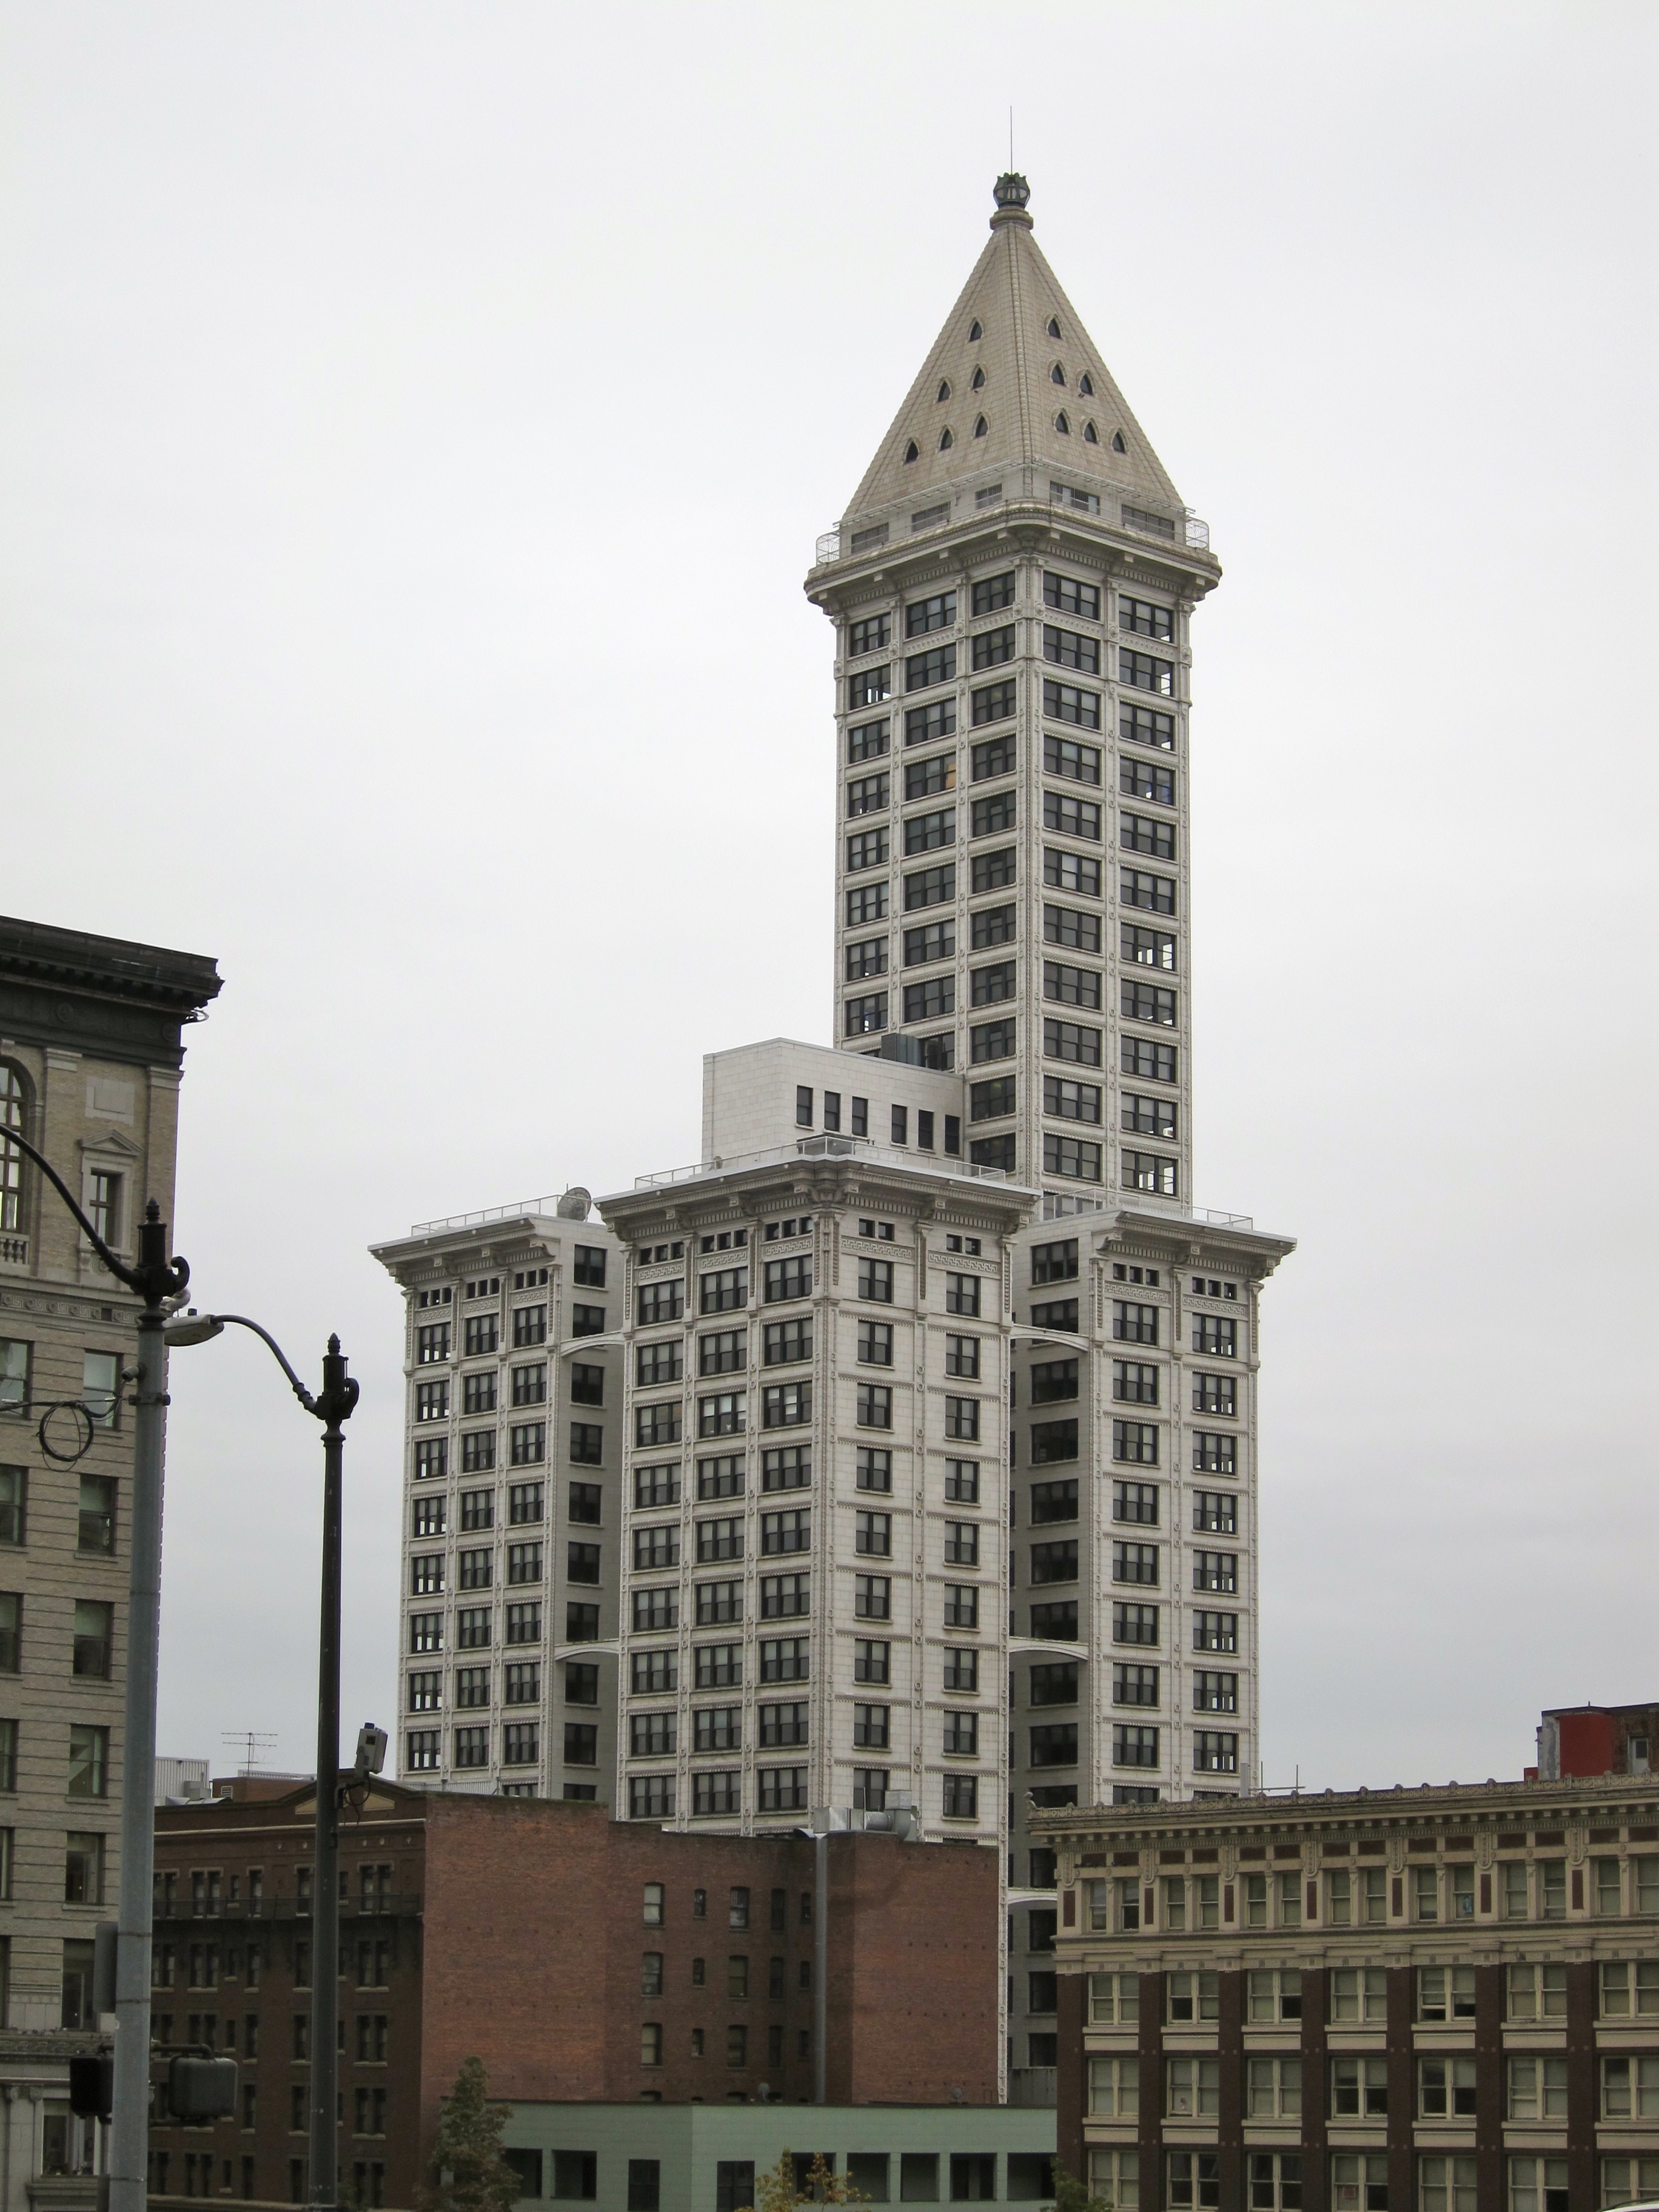 The Smith Tower